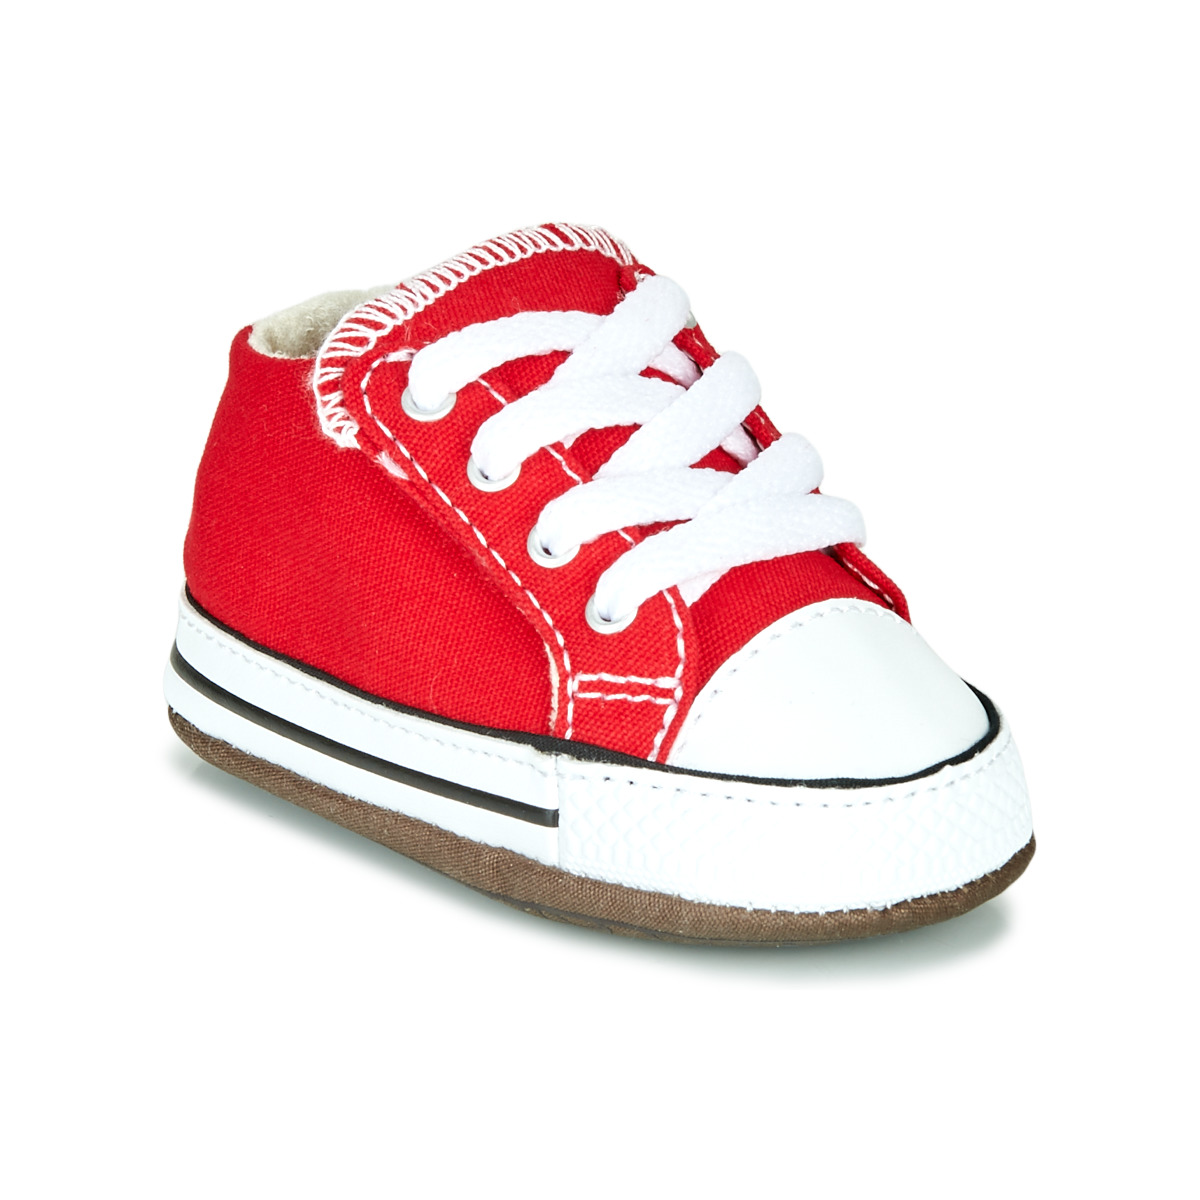 Converse Rouge CHUCK TAYLOR ALL STAR CRIBSTER CANVAS COLOR MID SbvD93U5